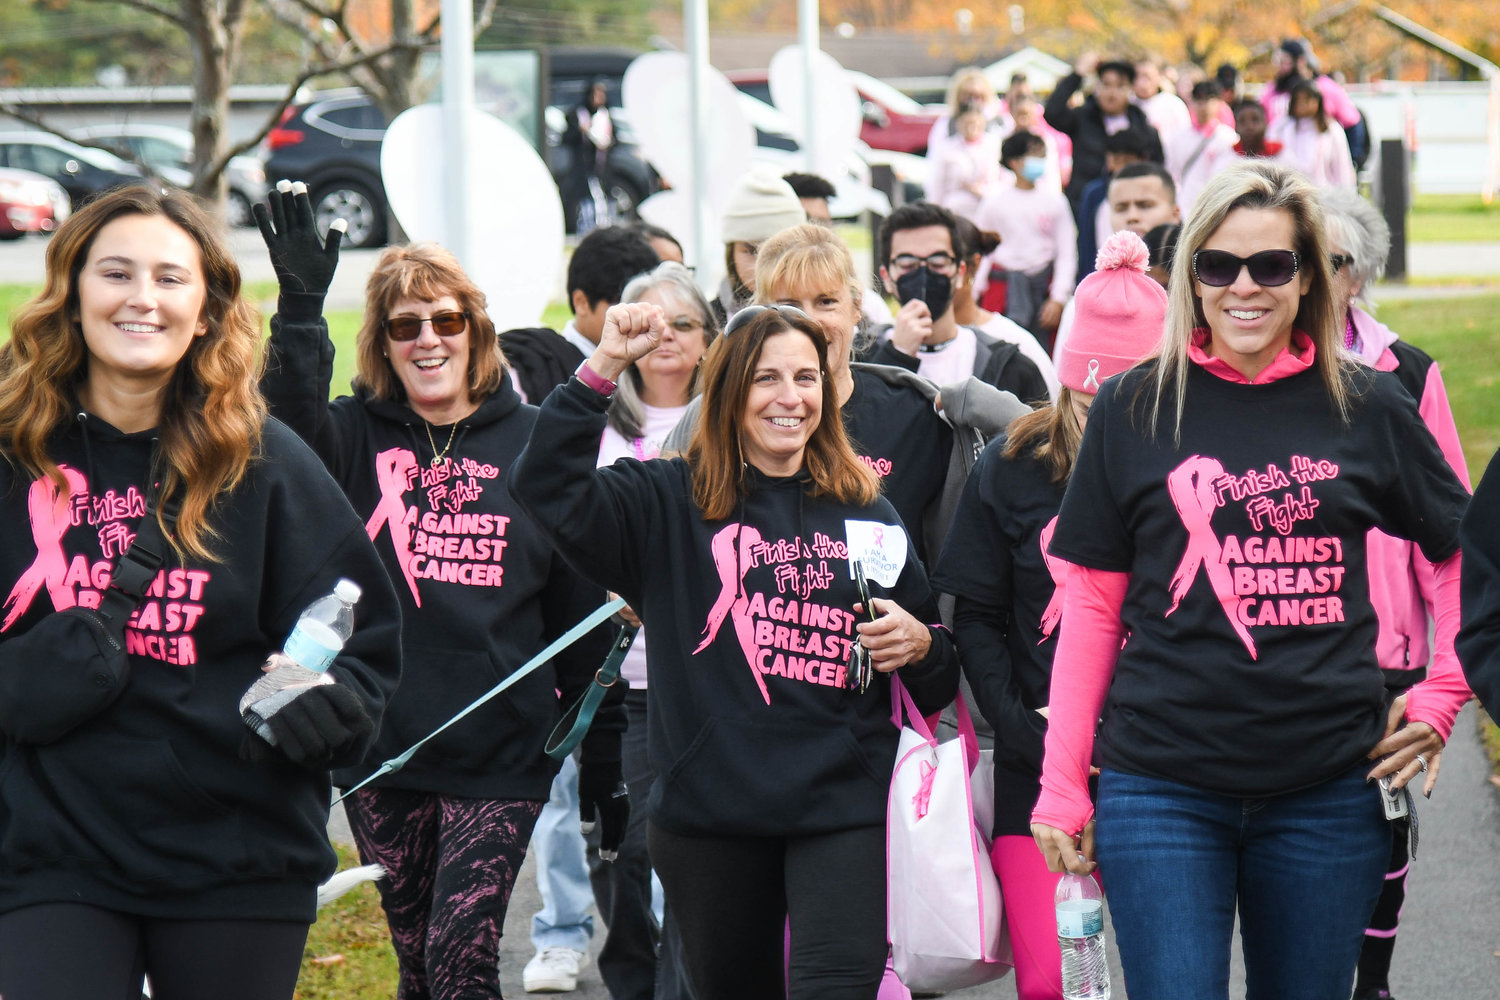 Supporters participate in the Making Strides Against Breast Cancer walk presented by Upstate Cancer Center Sunday at Mohawk Valley Community College in Utica.